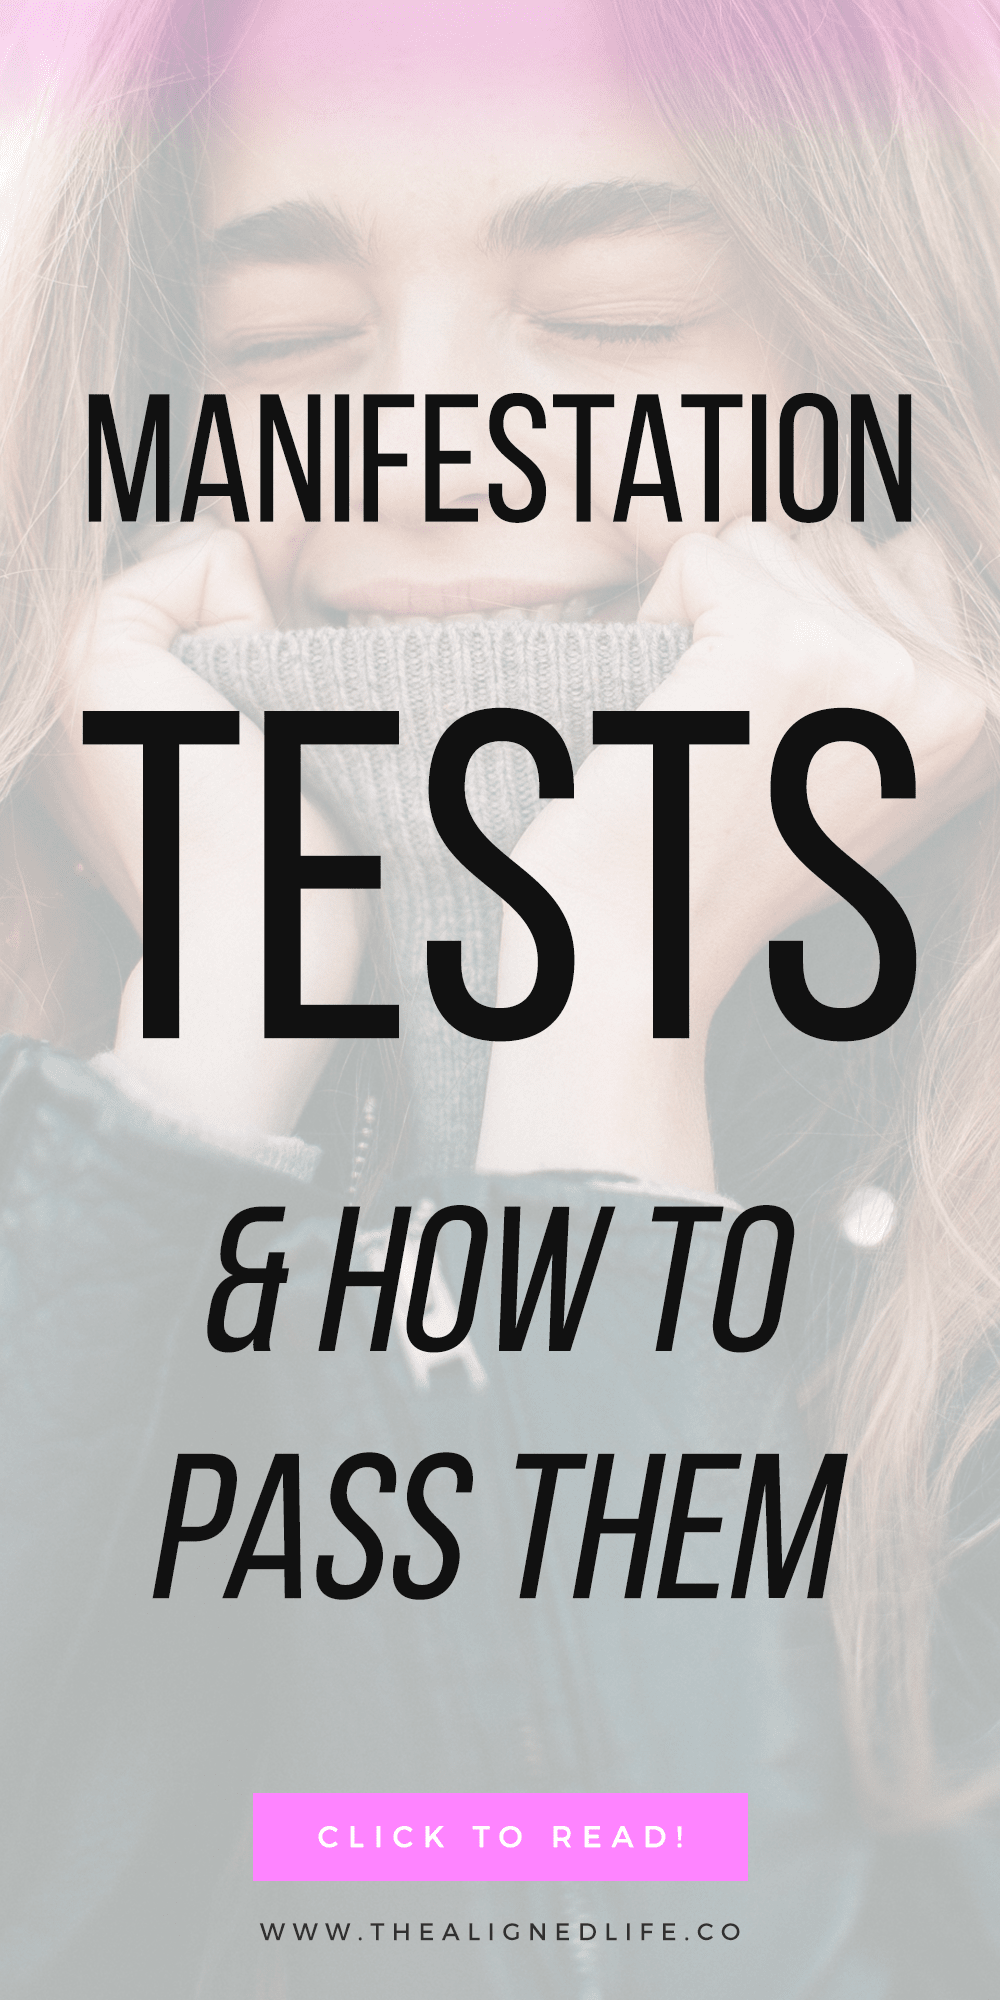 woman smiling with collar up & text that reads 3 Manifestation Tests & How To Pass Them